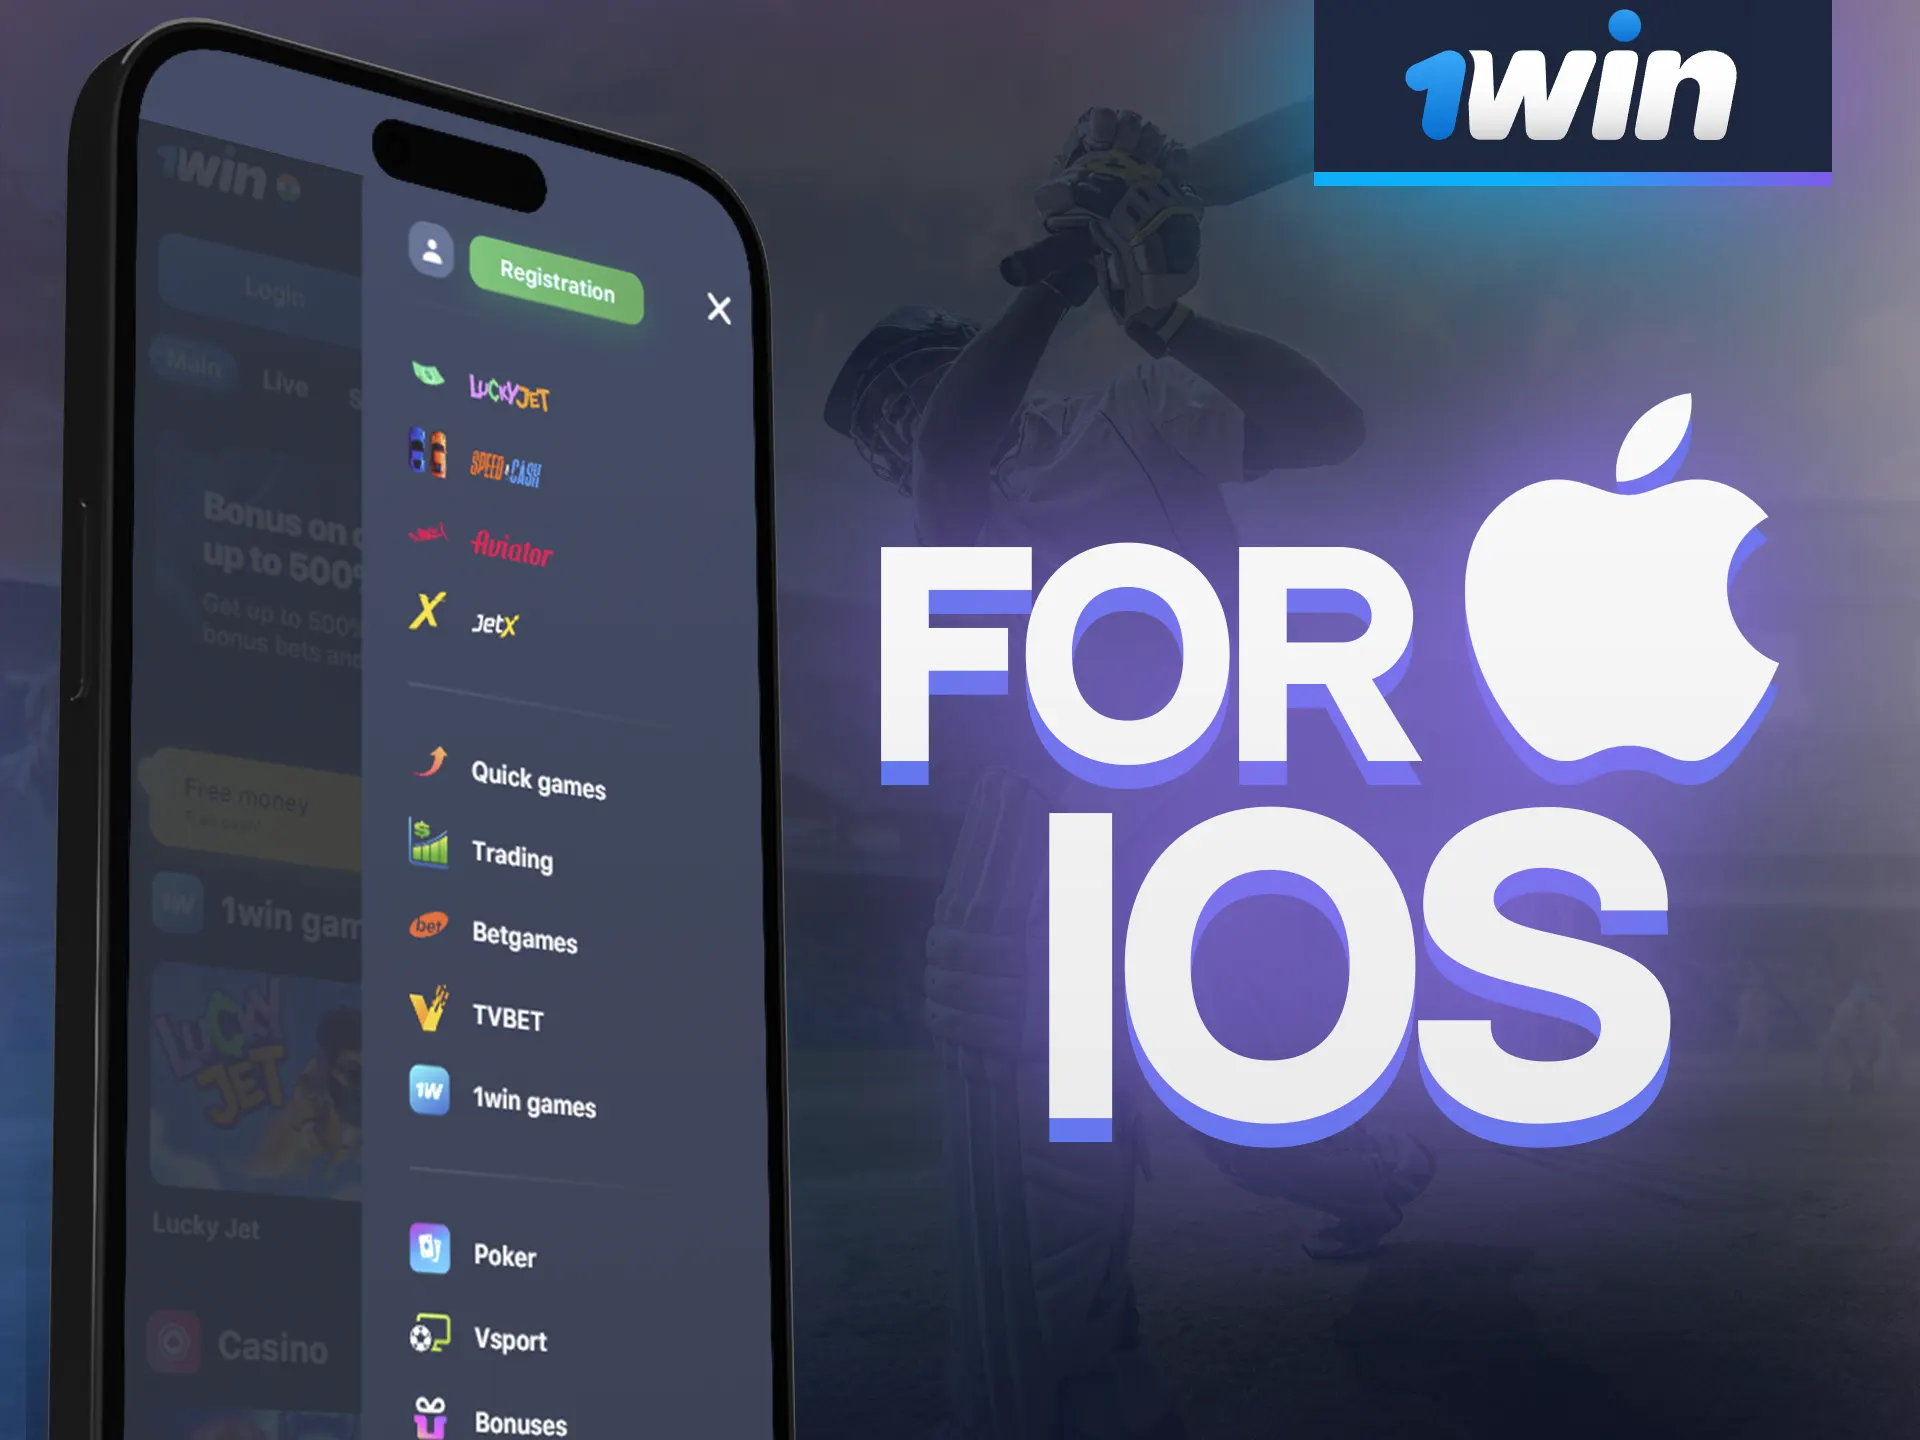 Install the 1Win app on your iOS phone.